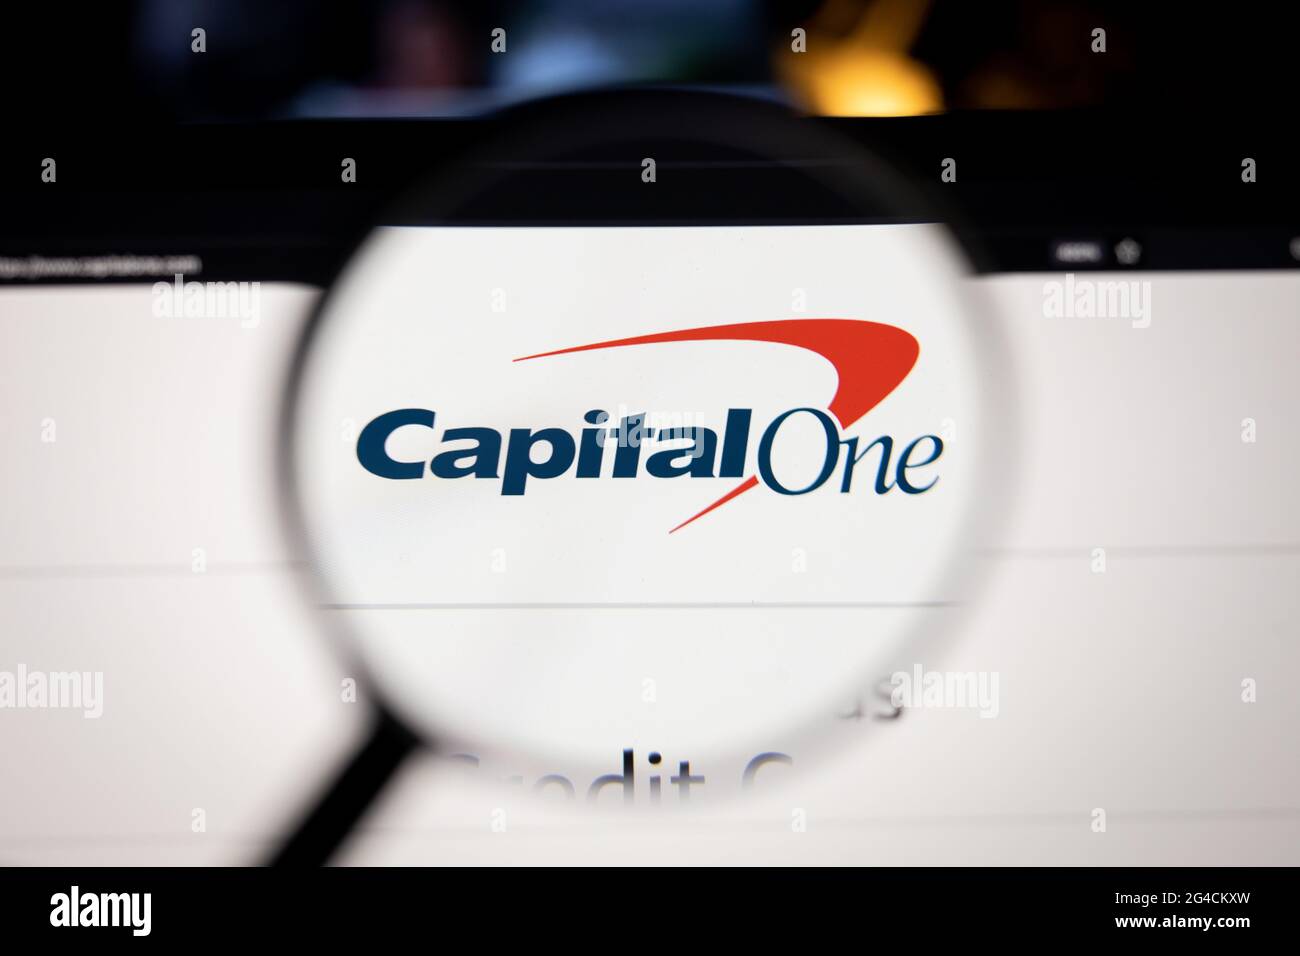 Capital One company logo on a website, seen on a computer screen through a magnifying glass. Stock Photo